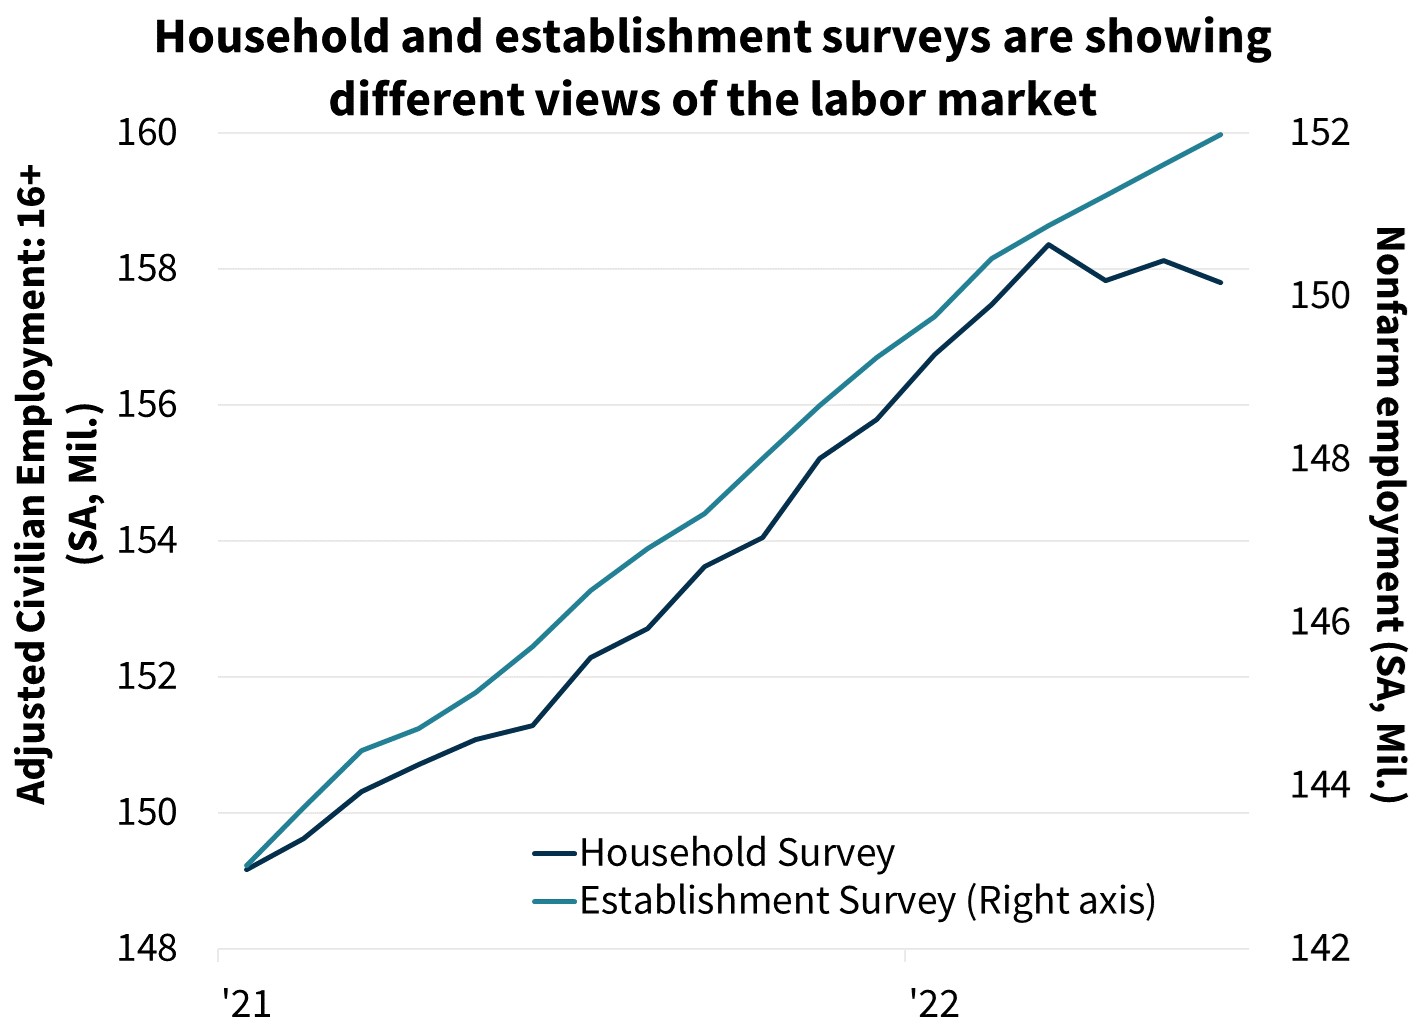 Household and establishment surveys are showing different views of the labor market
